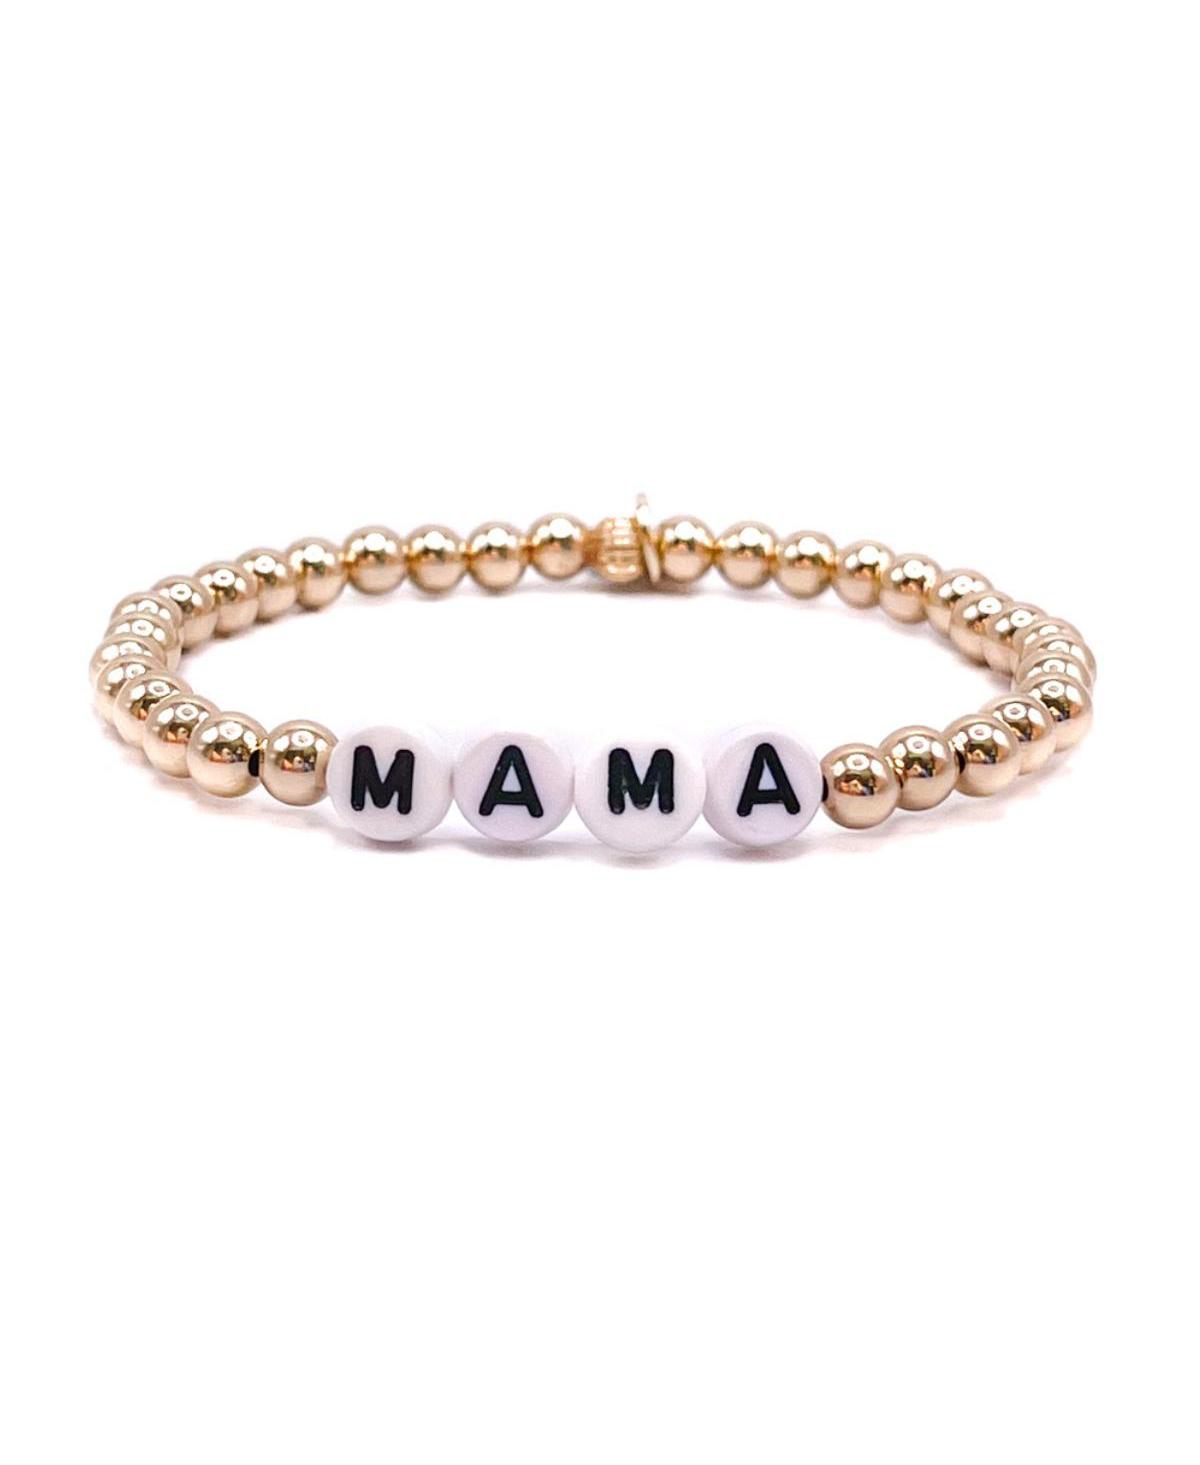 Non-Tarnishing Gold filled, 5mm Gold Ball "Mama" Stretch Bracelet - Gold